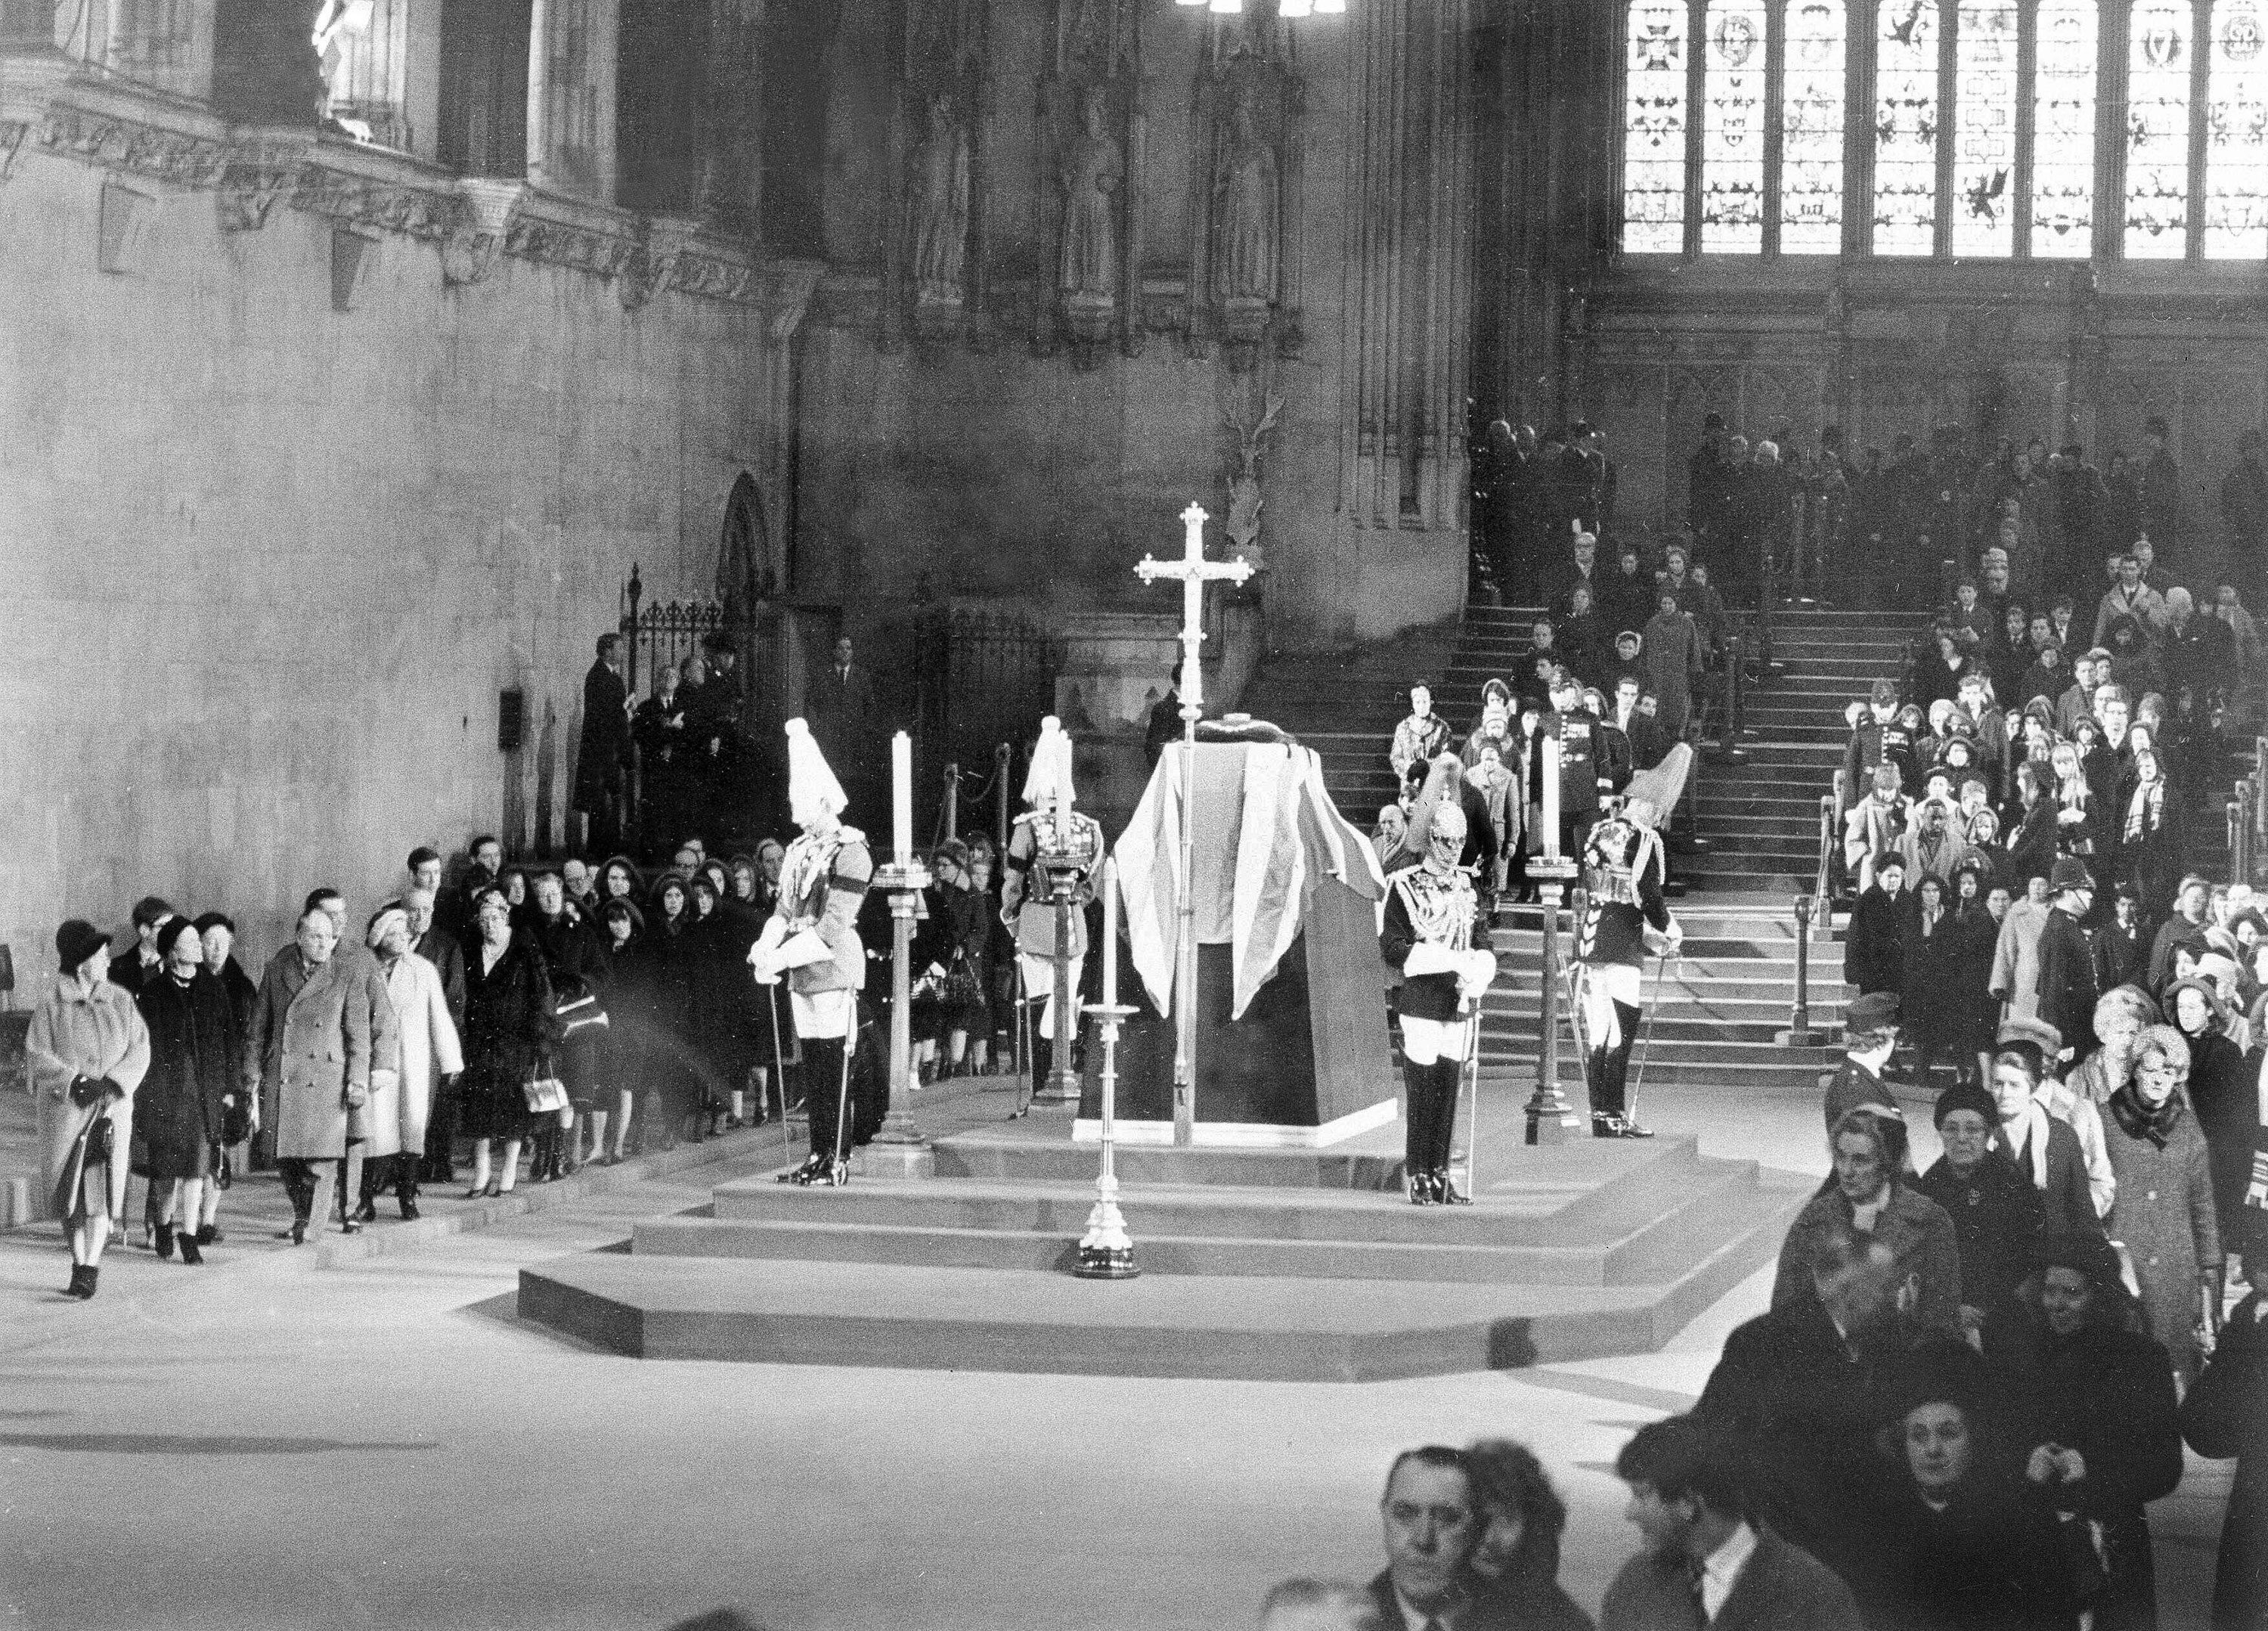 Two lines of mourners file past the coffin of Winston Churchill in Westminster Hall in January 1965.